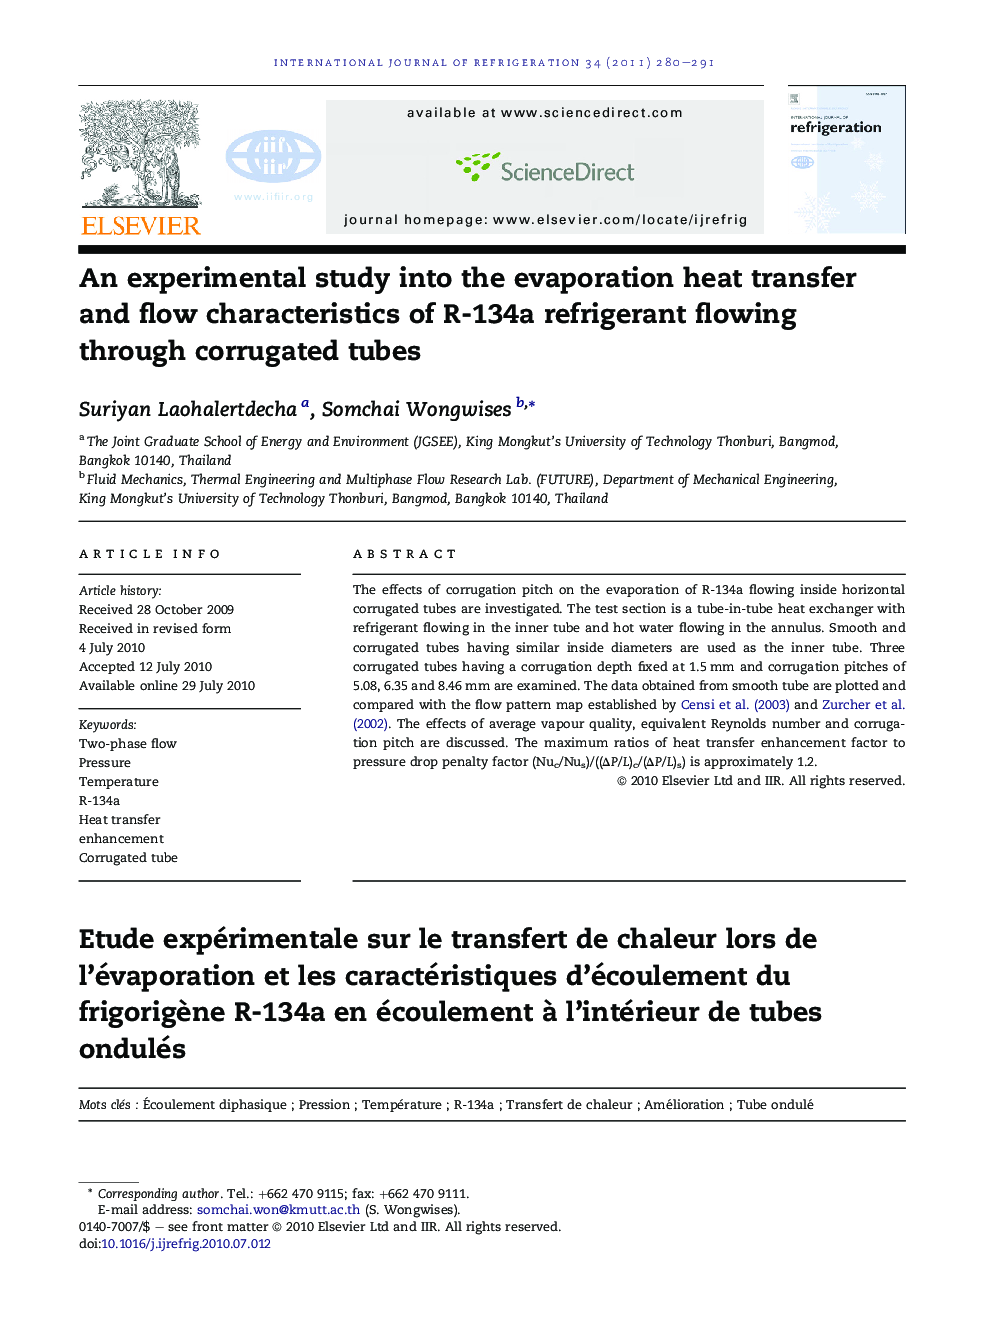 An experimental study into the evaporation heat transfer and flow characteristics of R-134a refrigerant flowing through corrugated tubes